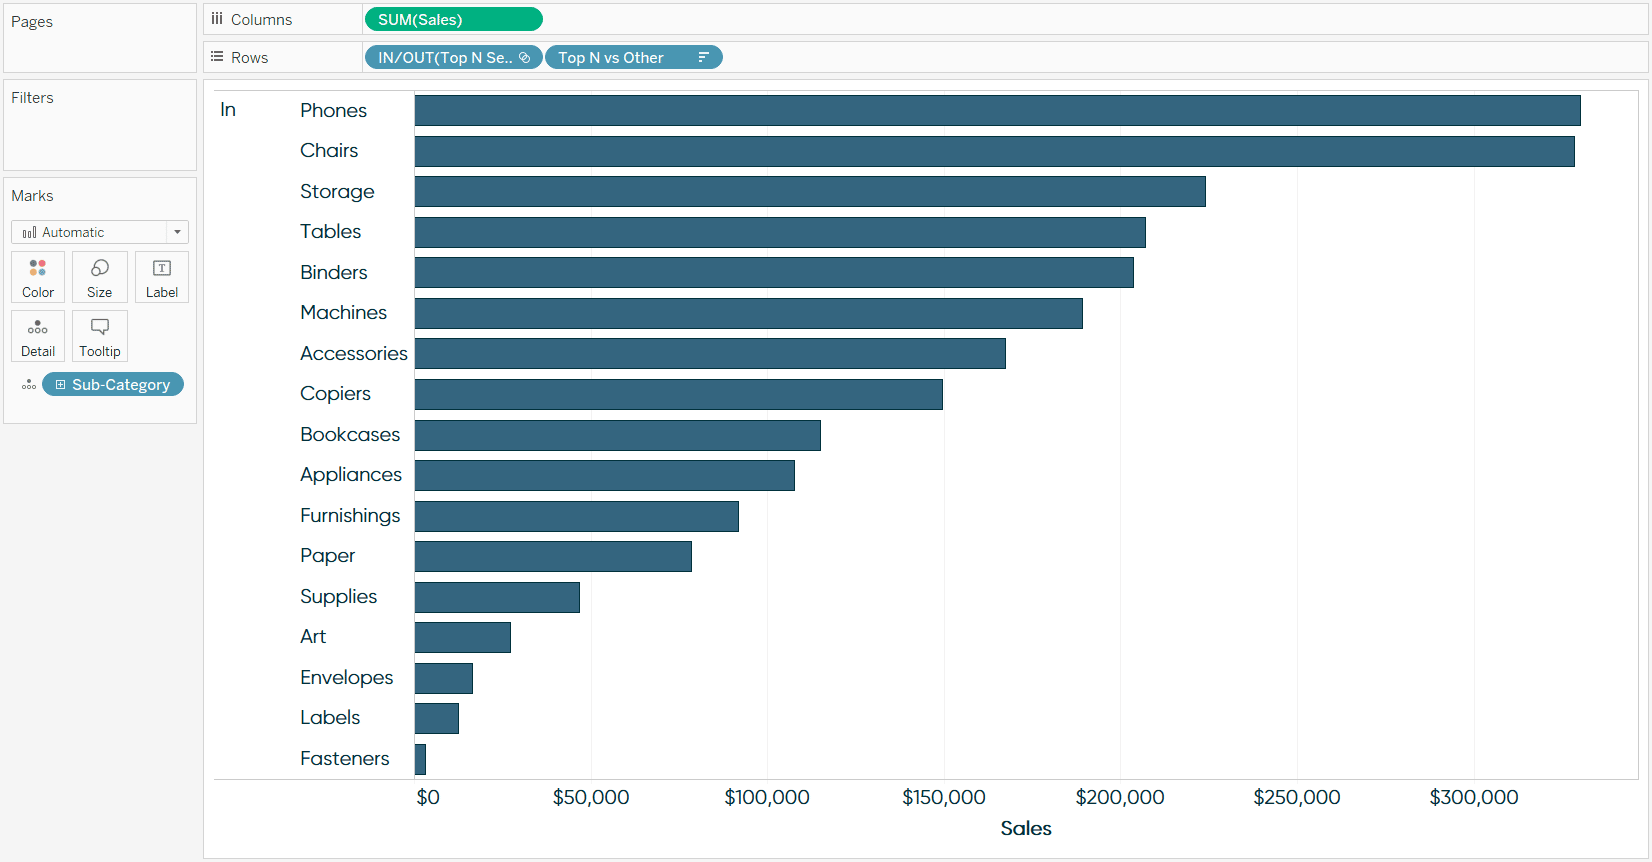 Sales by Top N vs Other Bar Chart with Sub-Category on Detail in Tableau